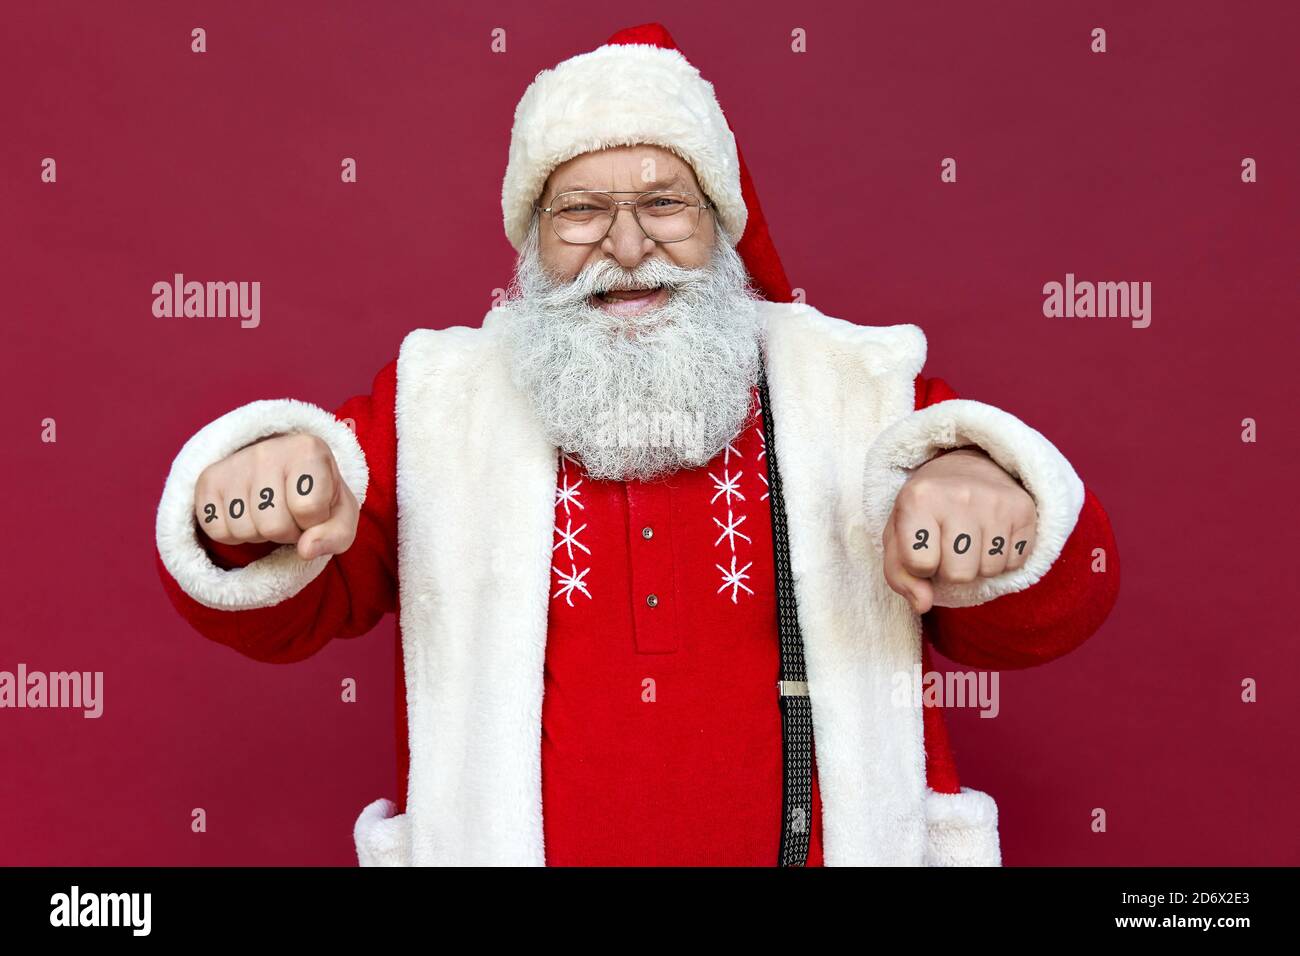 Happy Santa Claus wearing costume showing fists isolated on red background. Stock Photo